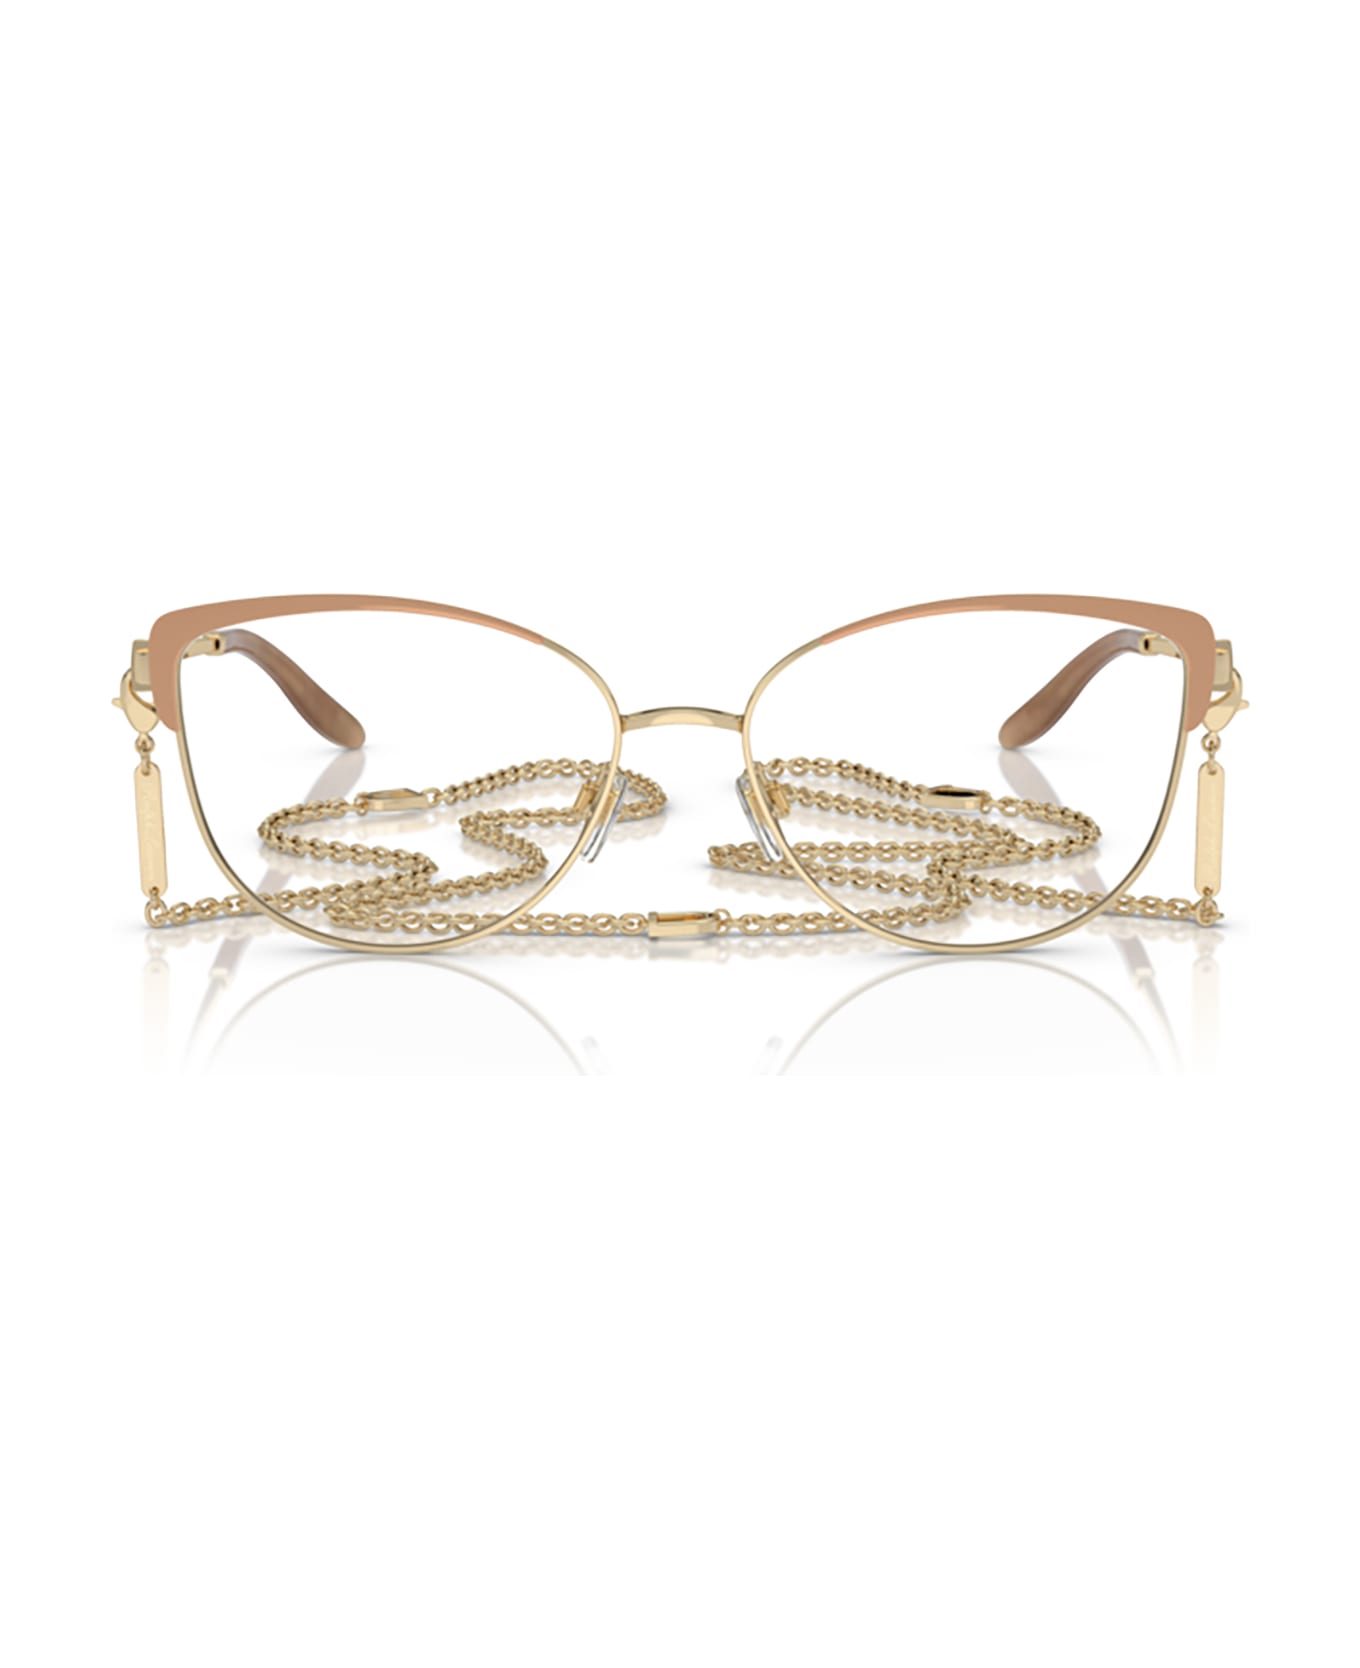 Ralph Lauren Rl5123 Nude / Pale Gold Glasses - Nude / Pale Gold